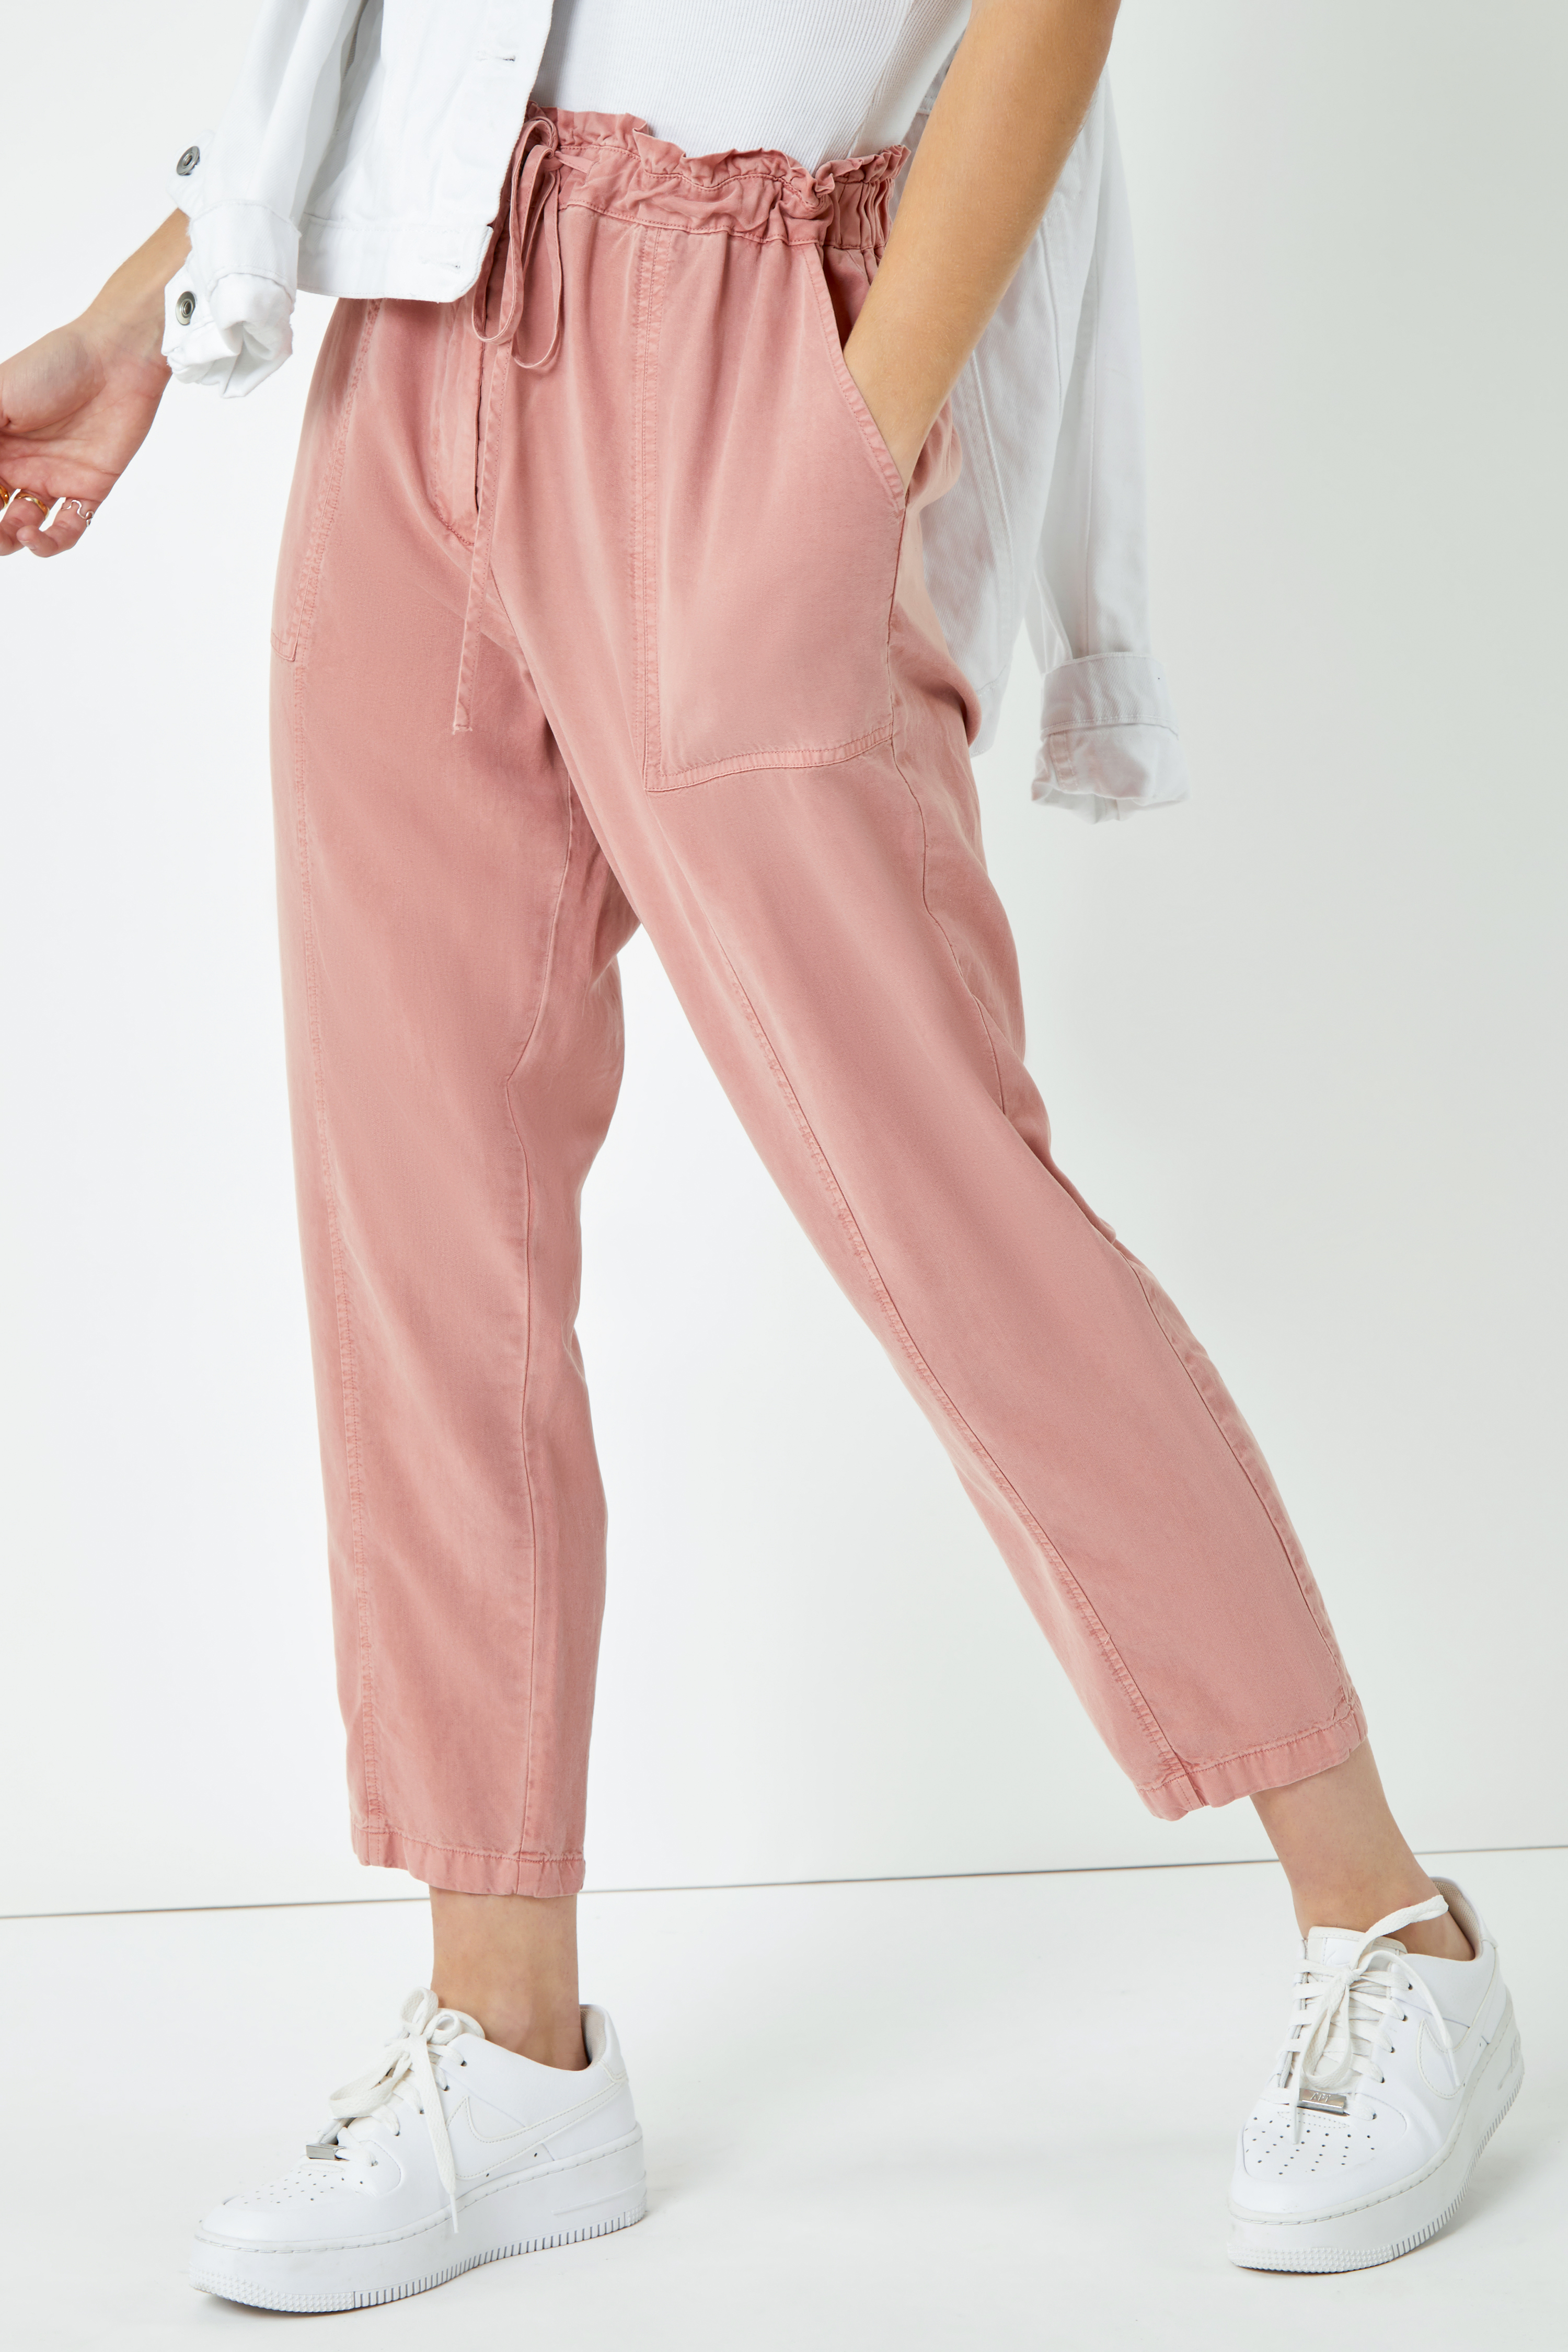 Rose Frill Detail Panel Trousers, Image 5 of 5